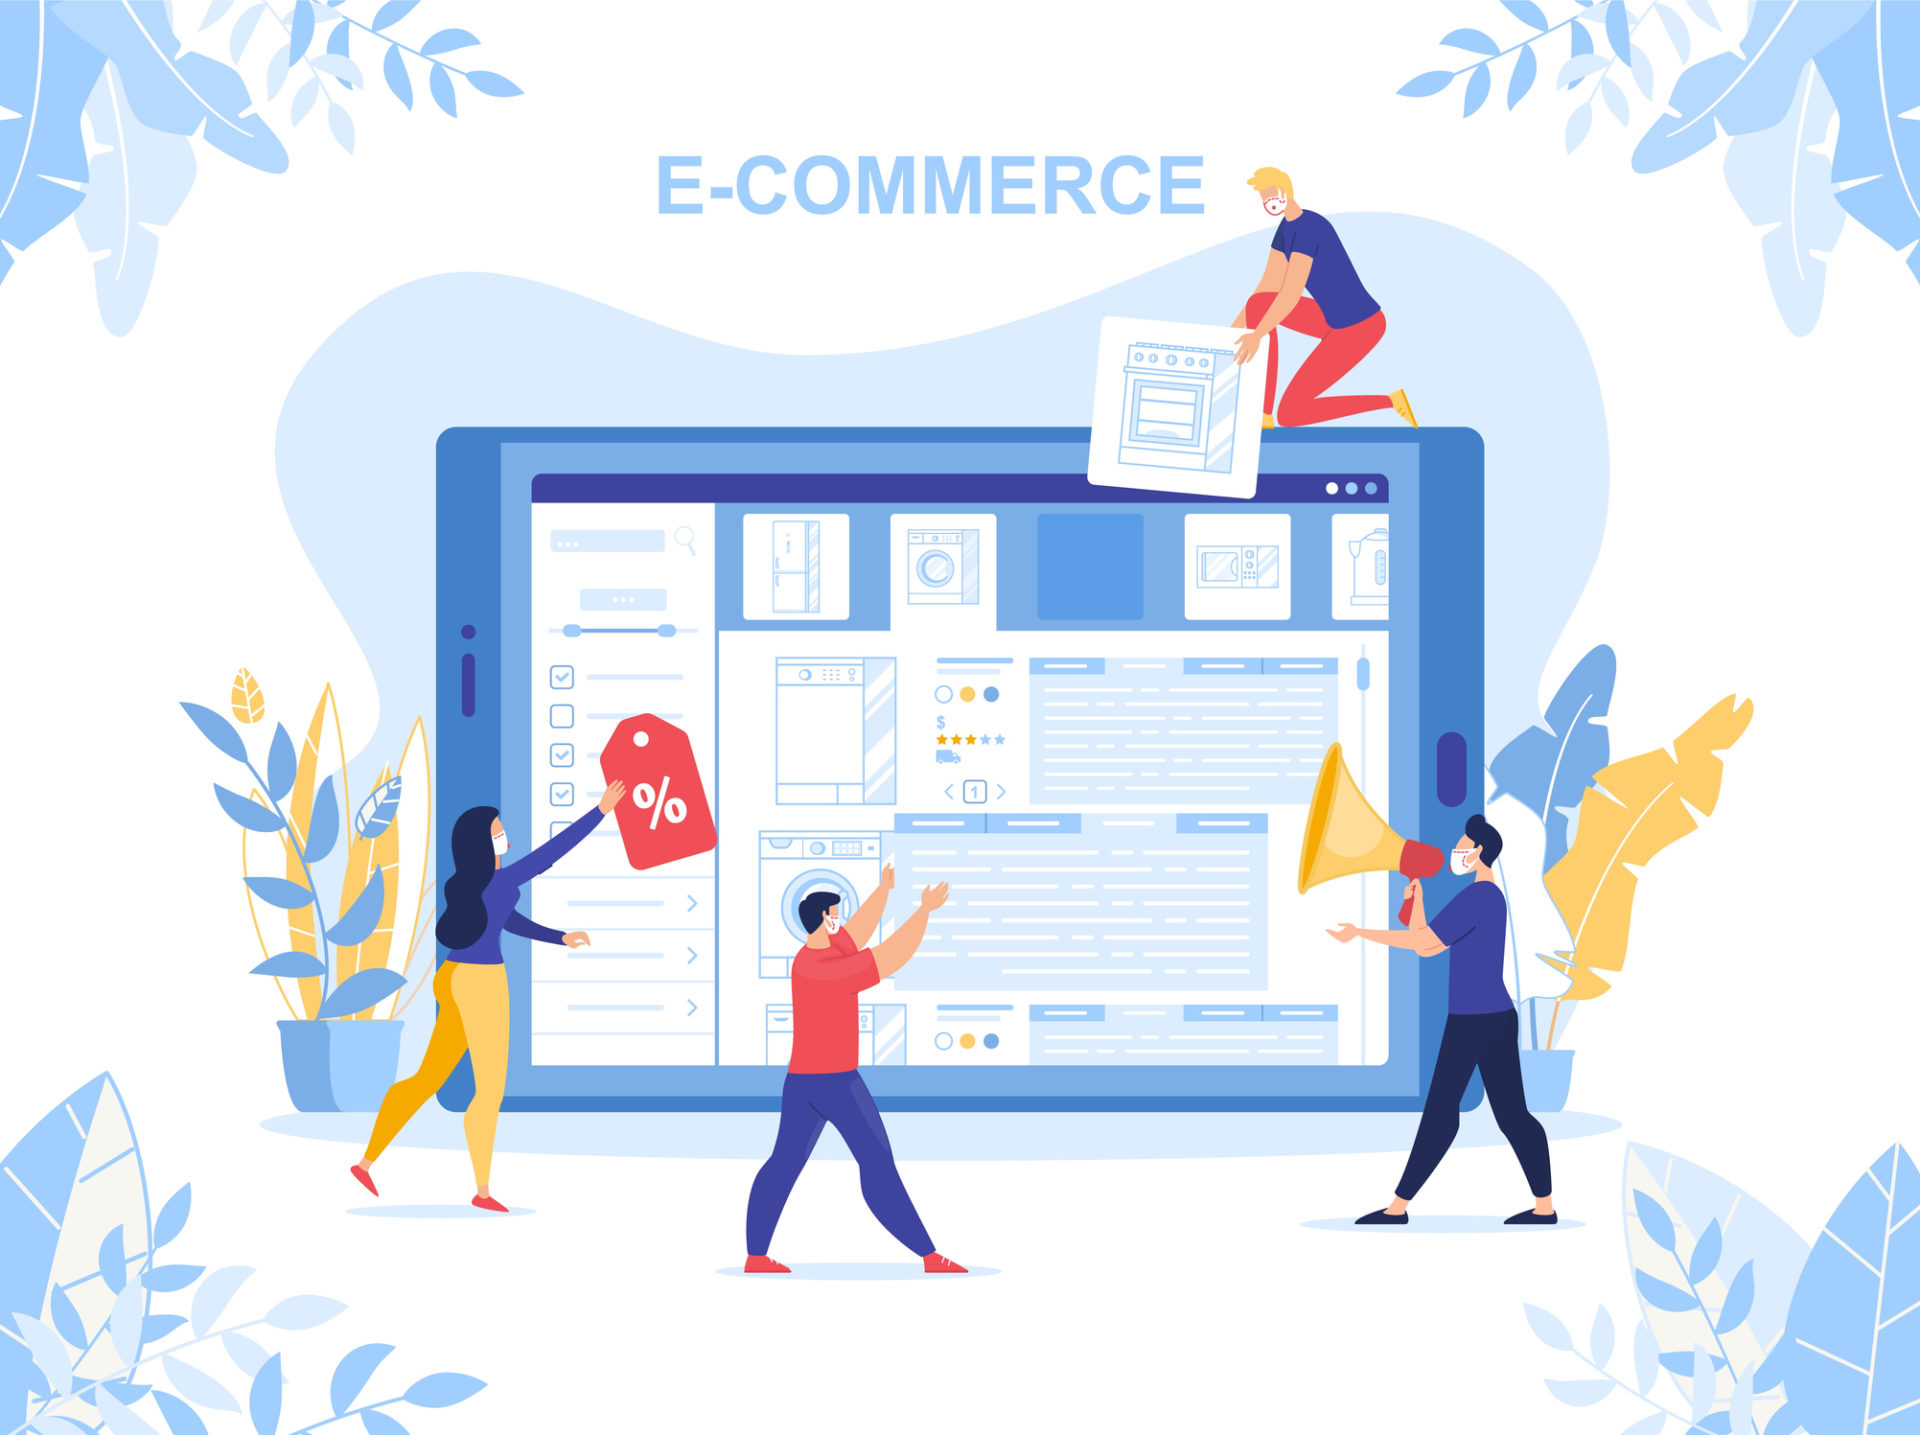 The 5 main benefits of e-commerce delegation